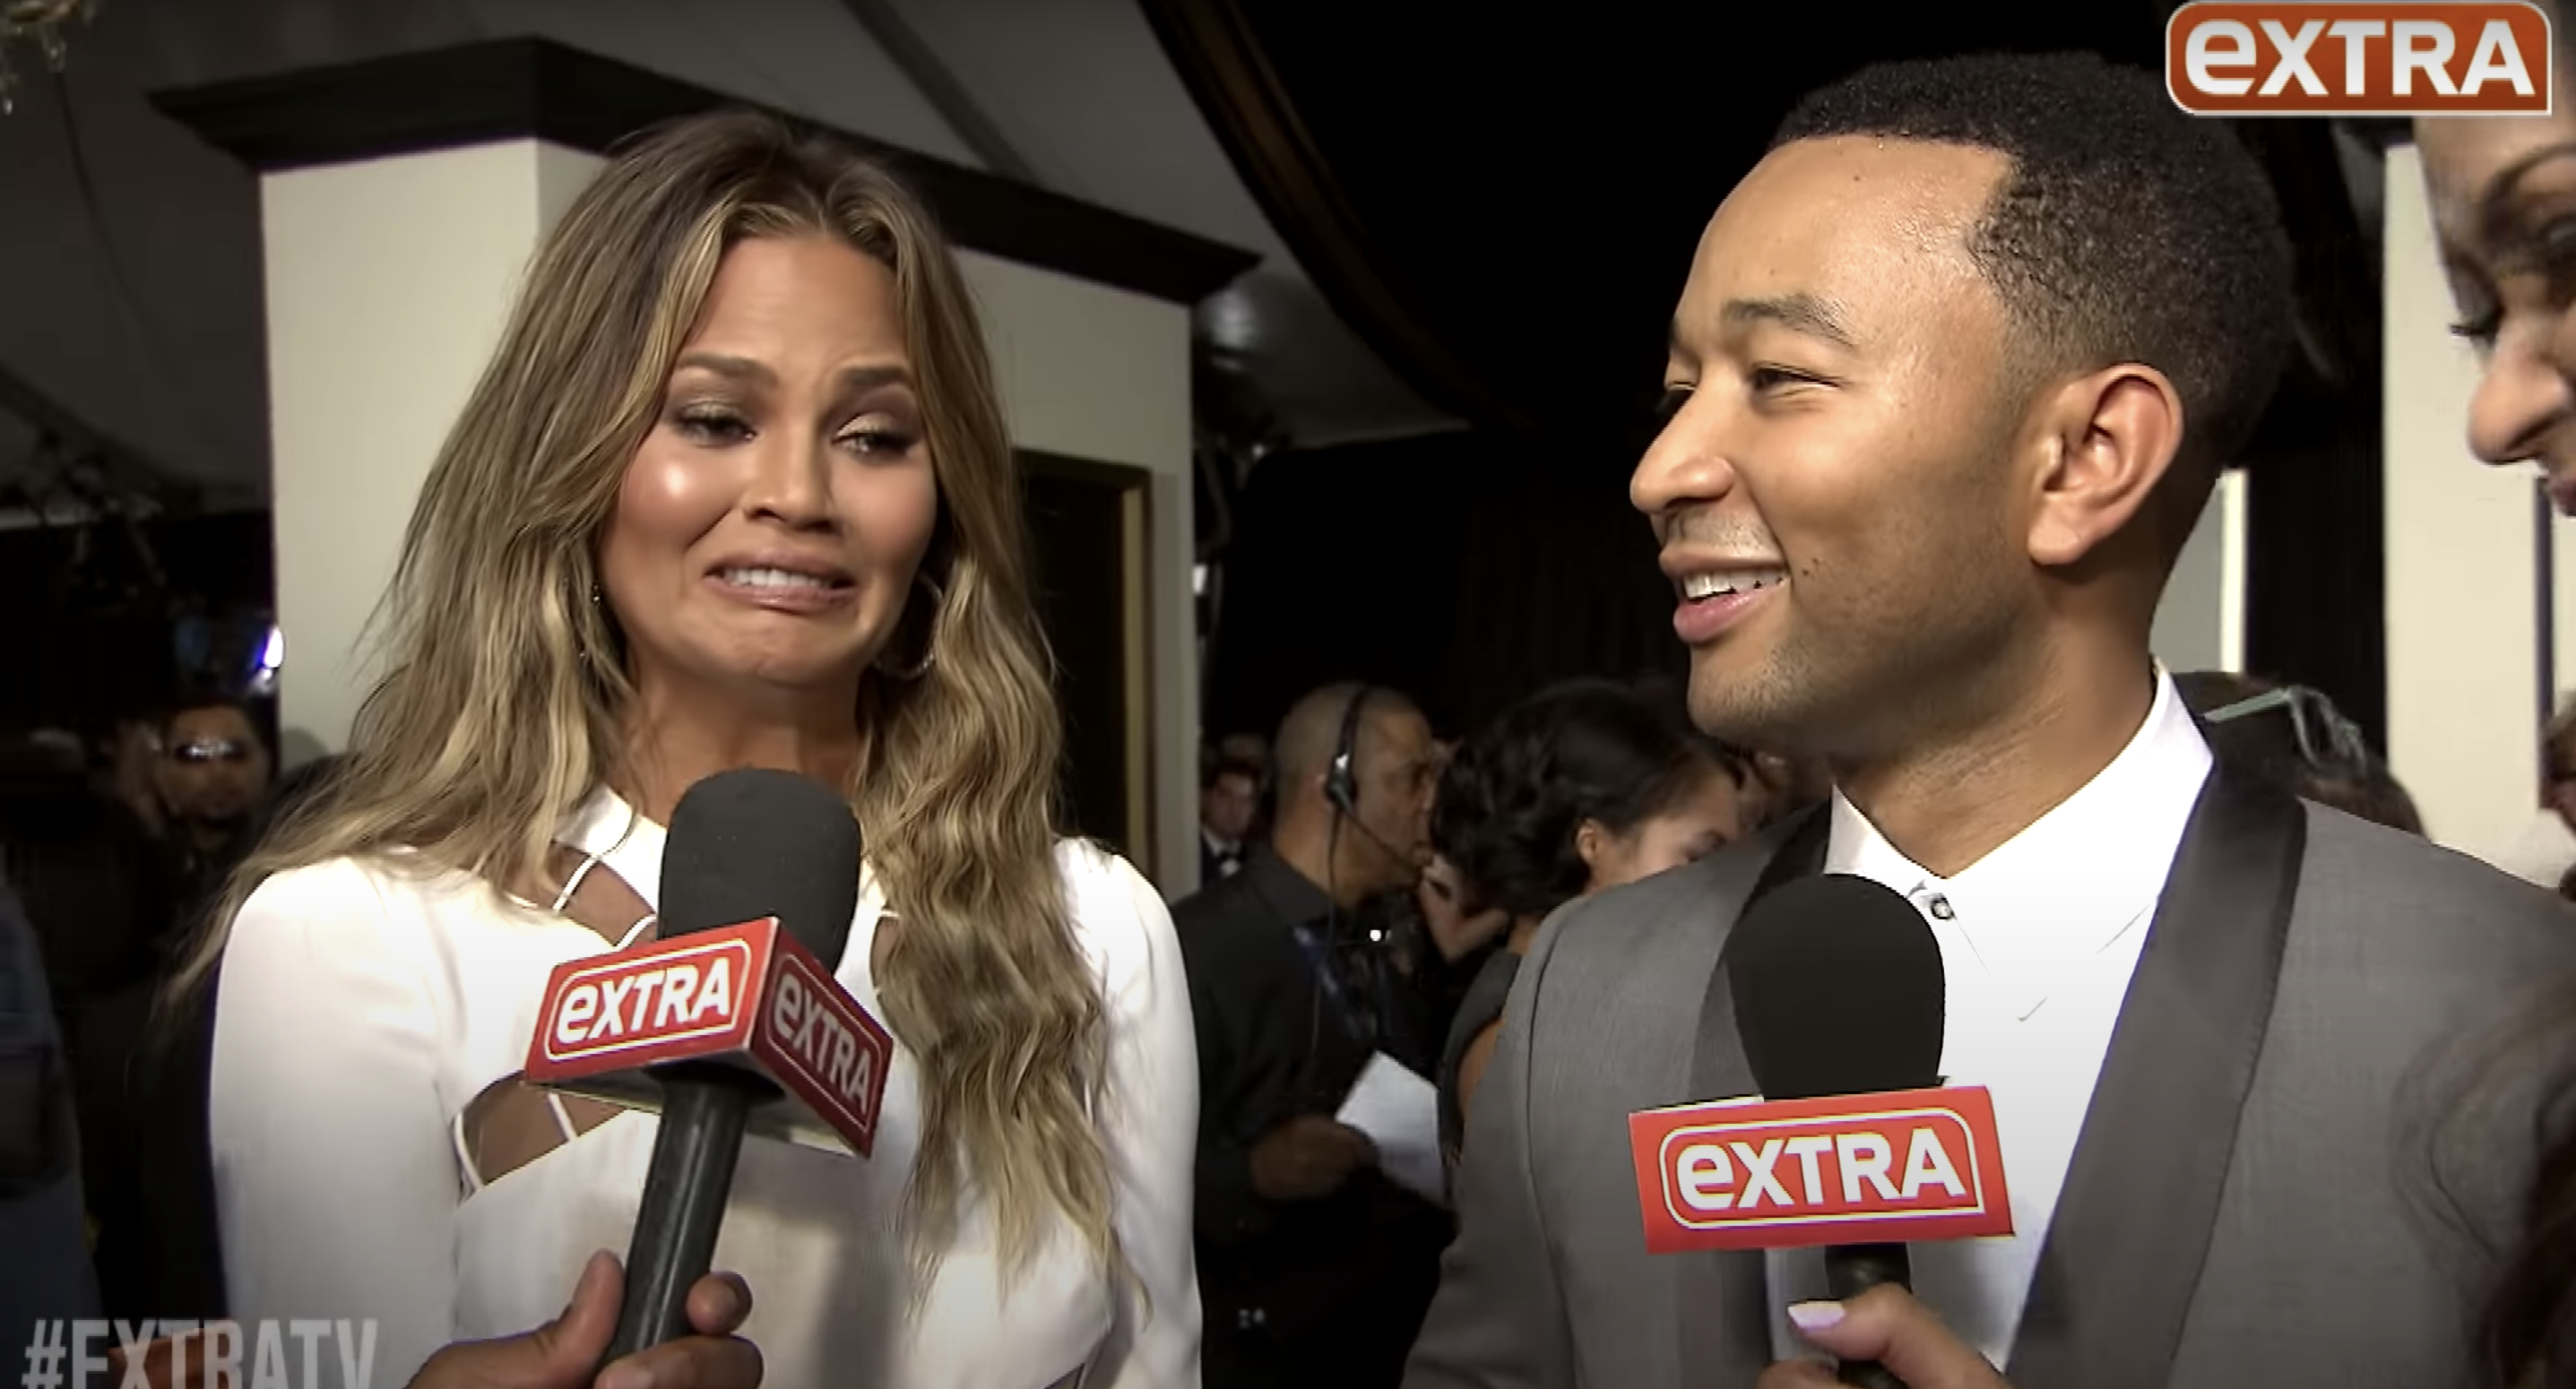 Chrissy and John being interviewed at the Grammys red carpet